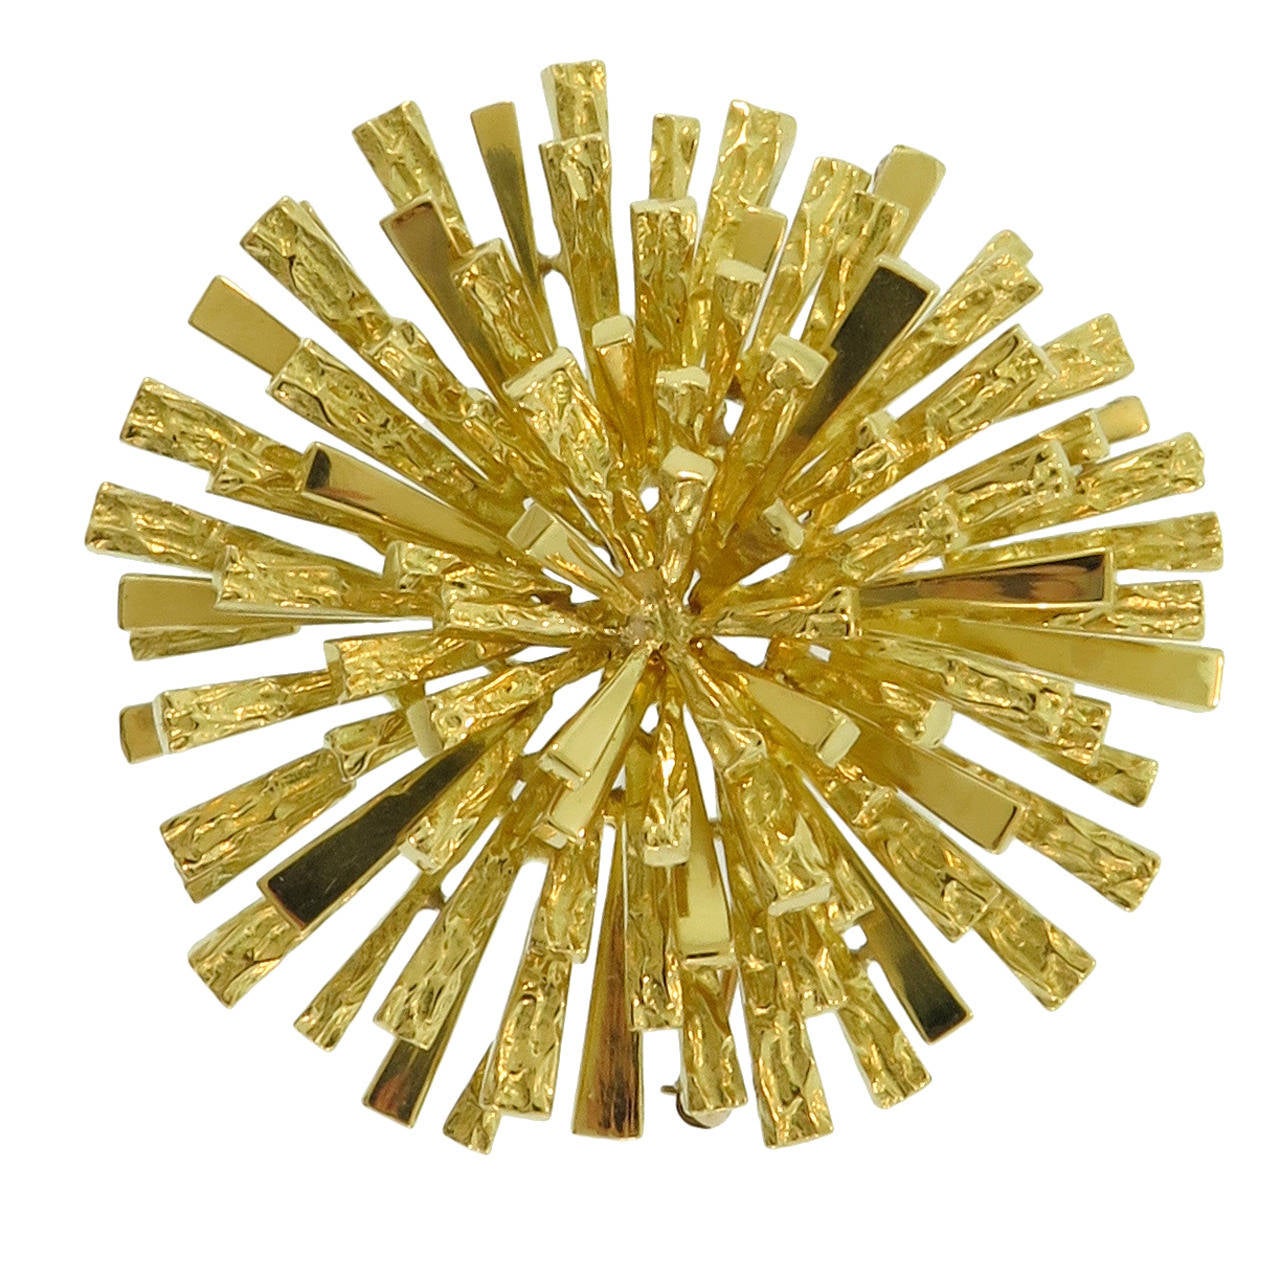 1960s Tiffany & Co. Gold Starburst Brooch For Sale